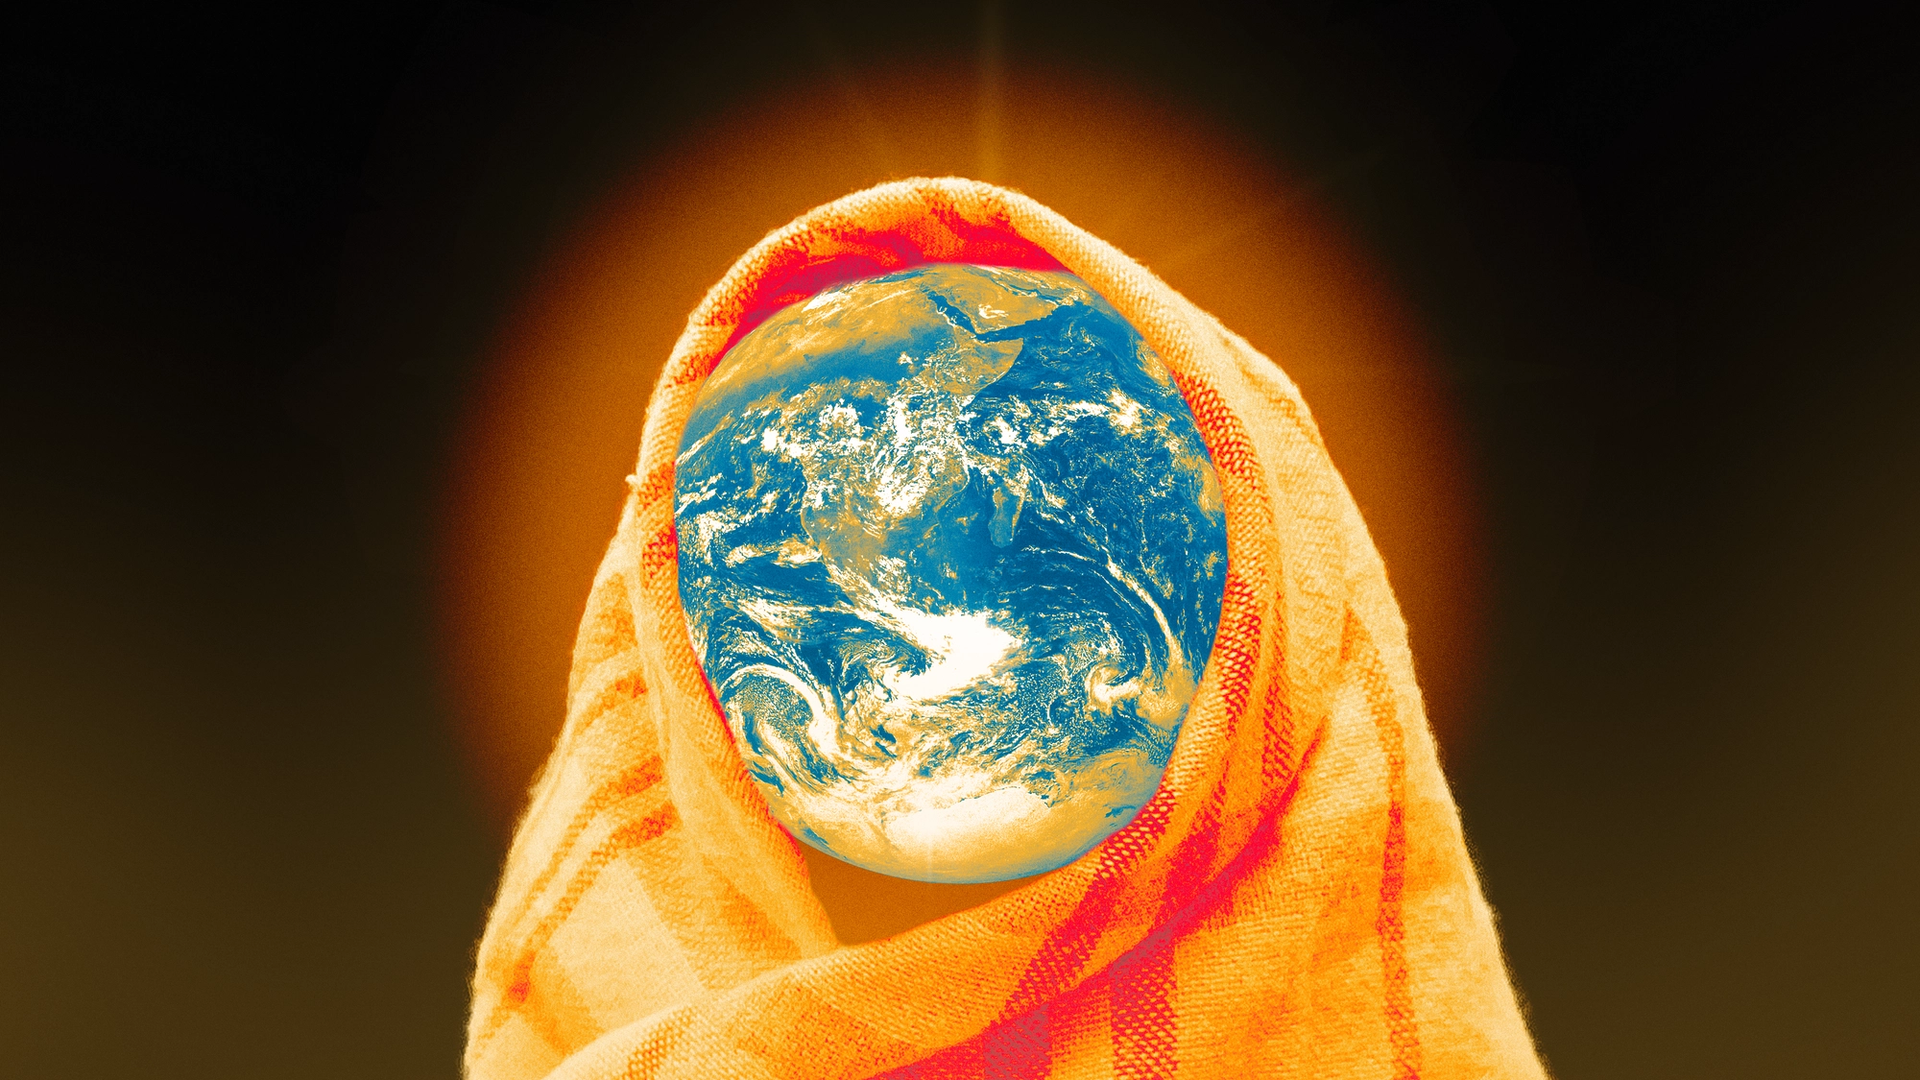 An illustration of the earth wrapped in a blanket.